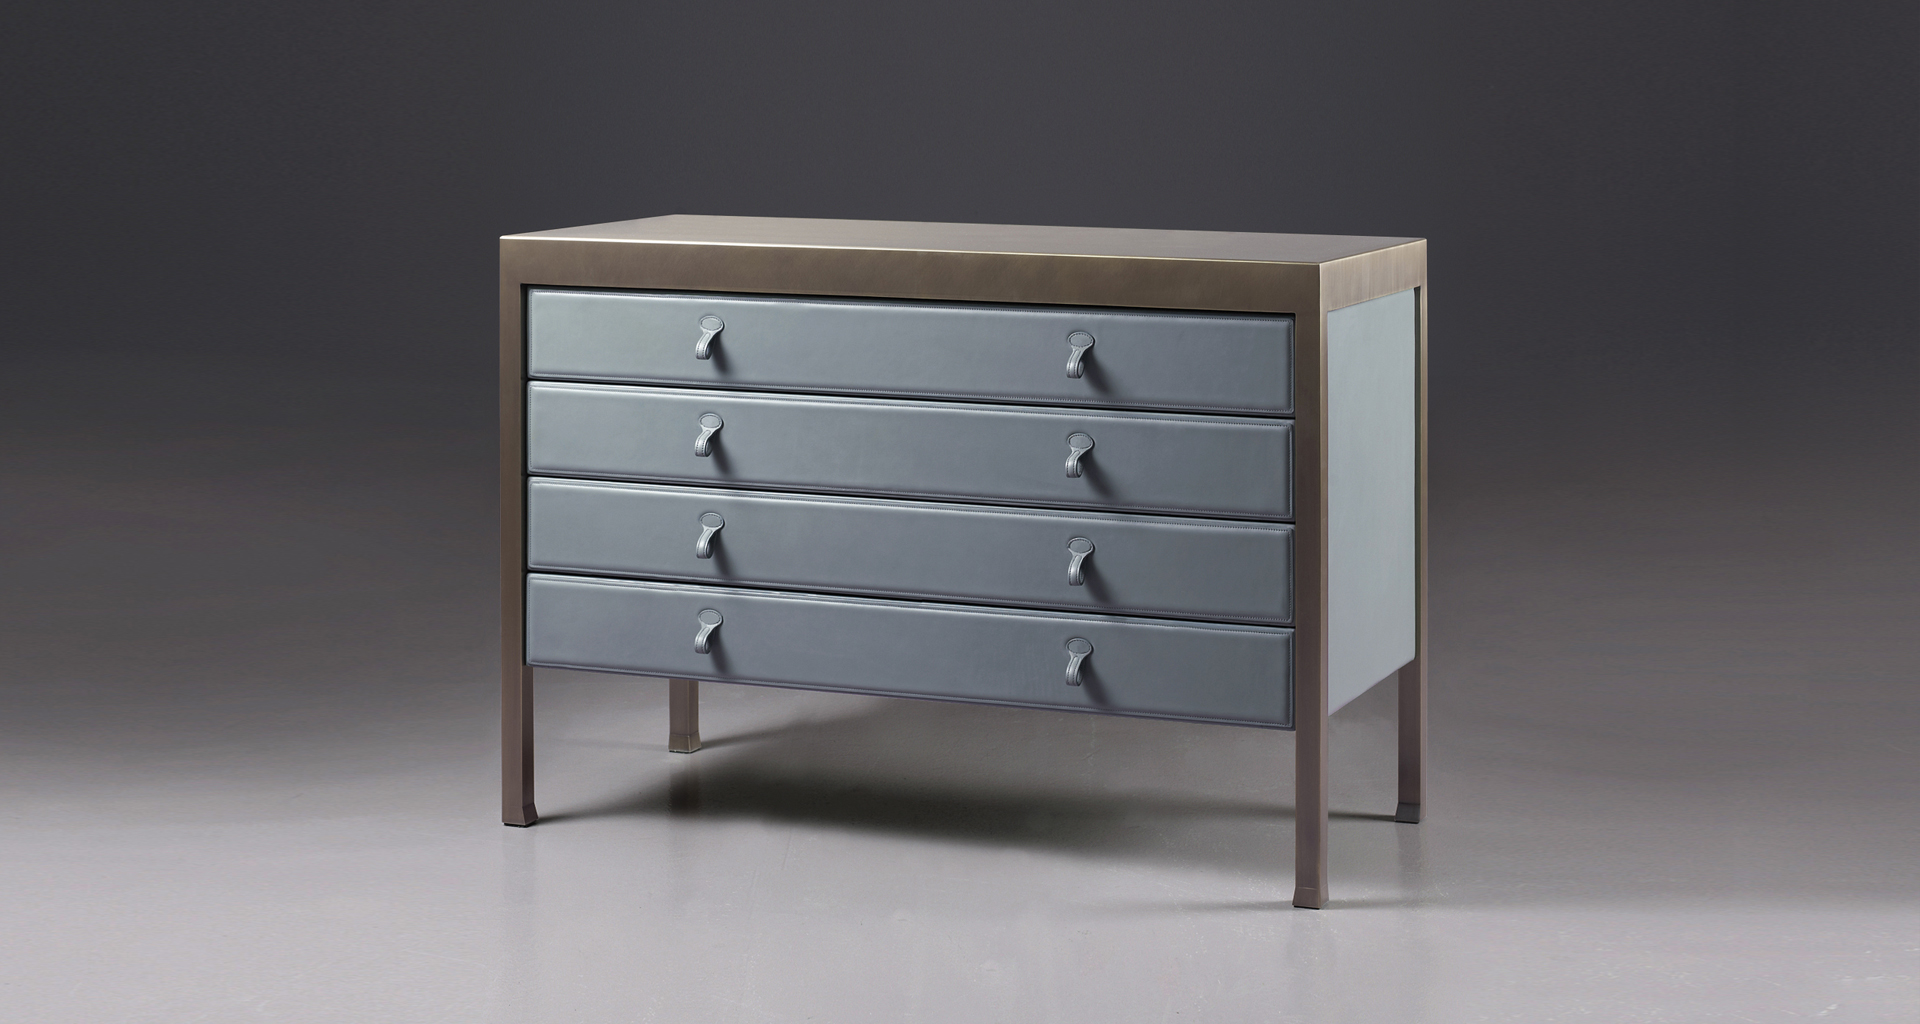 Gong is a bronze chest of drawers covered in fabric or leather from Promemoria's catalogue | Promemoria